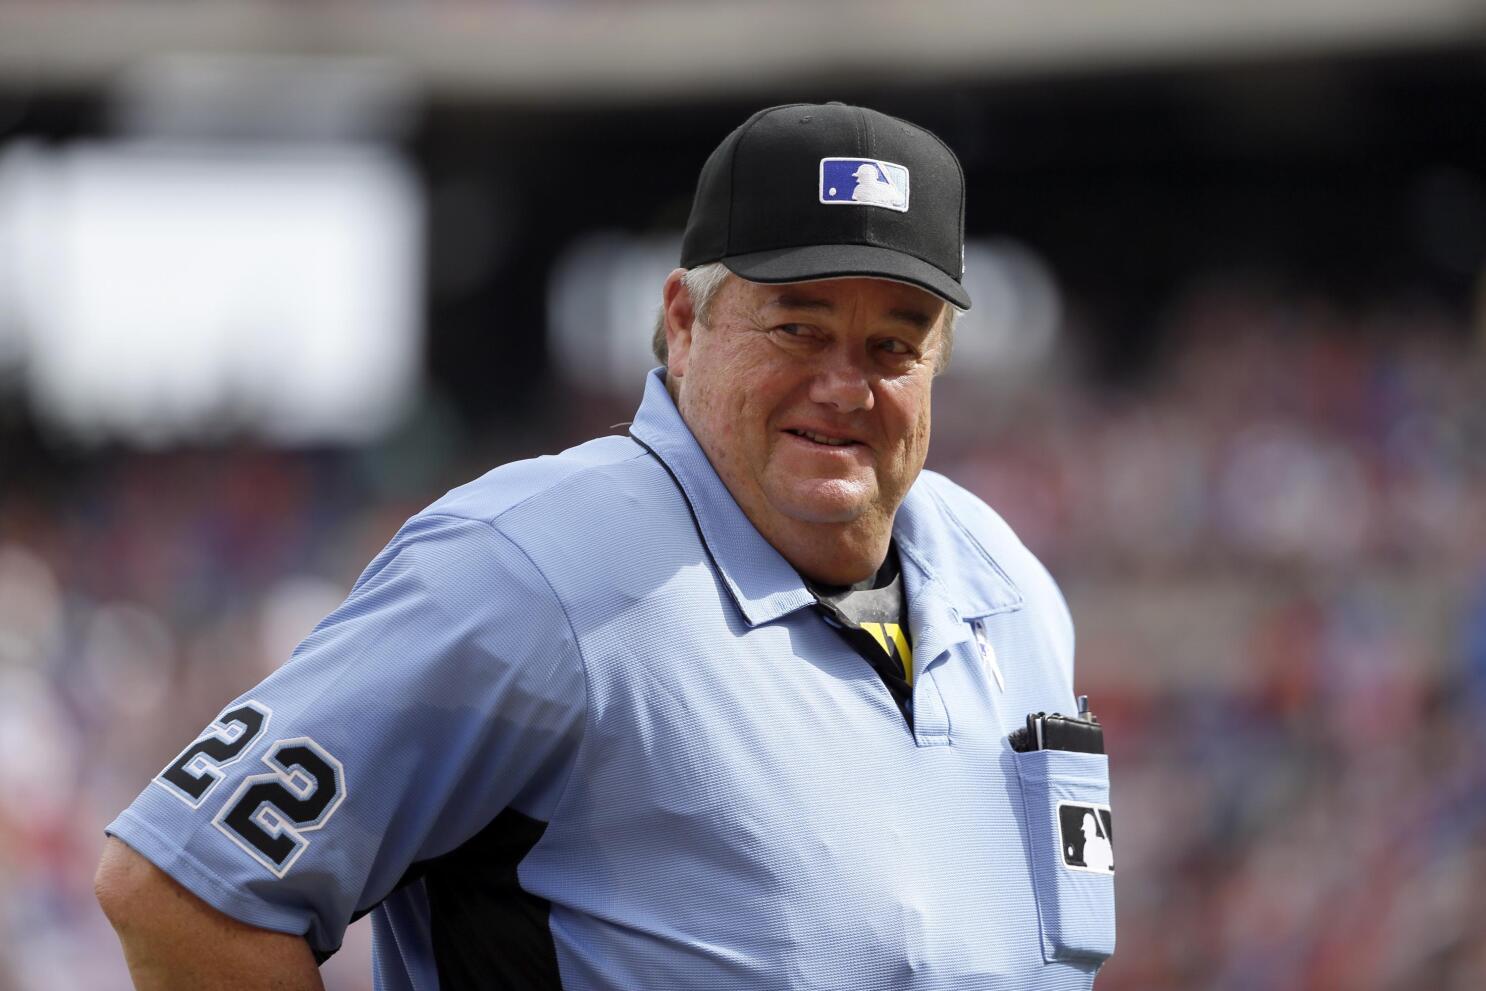 Joe West suspended for 3 games for comments about Beltre